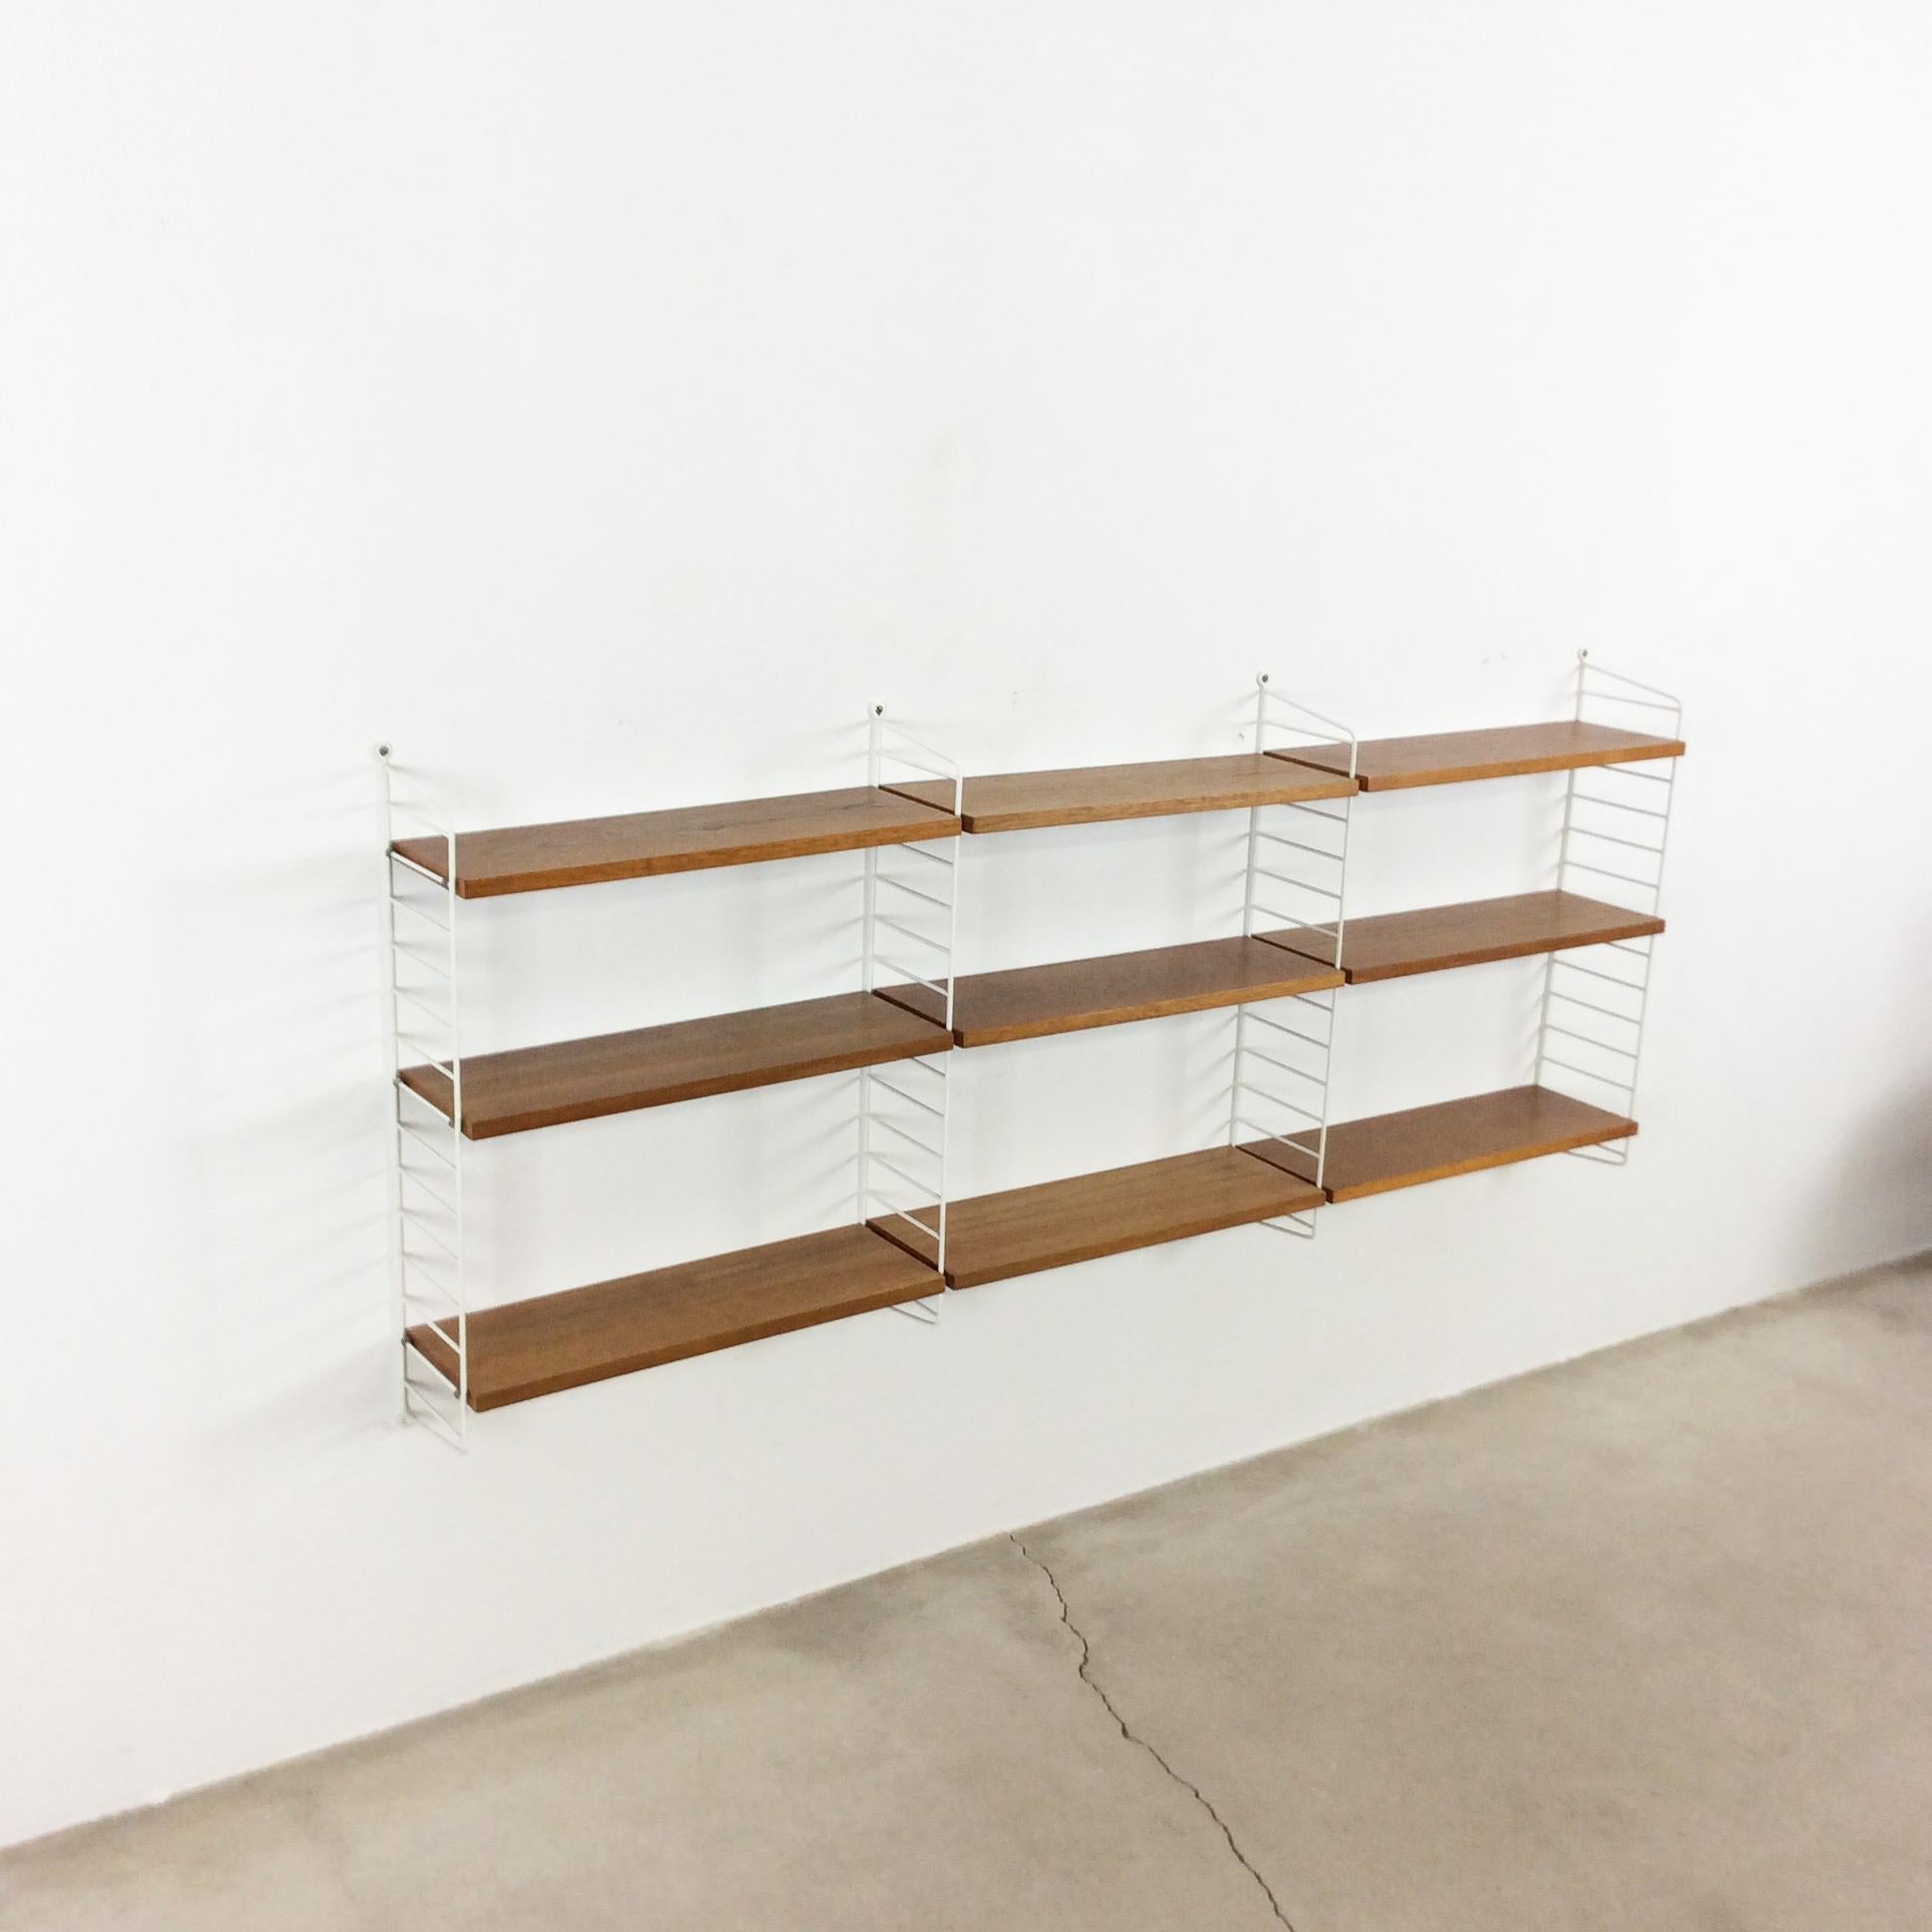 String regal wall unit

Made in Sweden

Bokhyllan ’The Ladder Shelf’

Design: Nils and Kajsa Strinning, 1949

The architect Nisse Strinning was born in 1917. From 1940 to 1947 he studied architecture in Stockholm, before he designed the